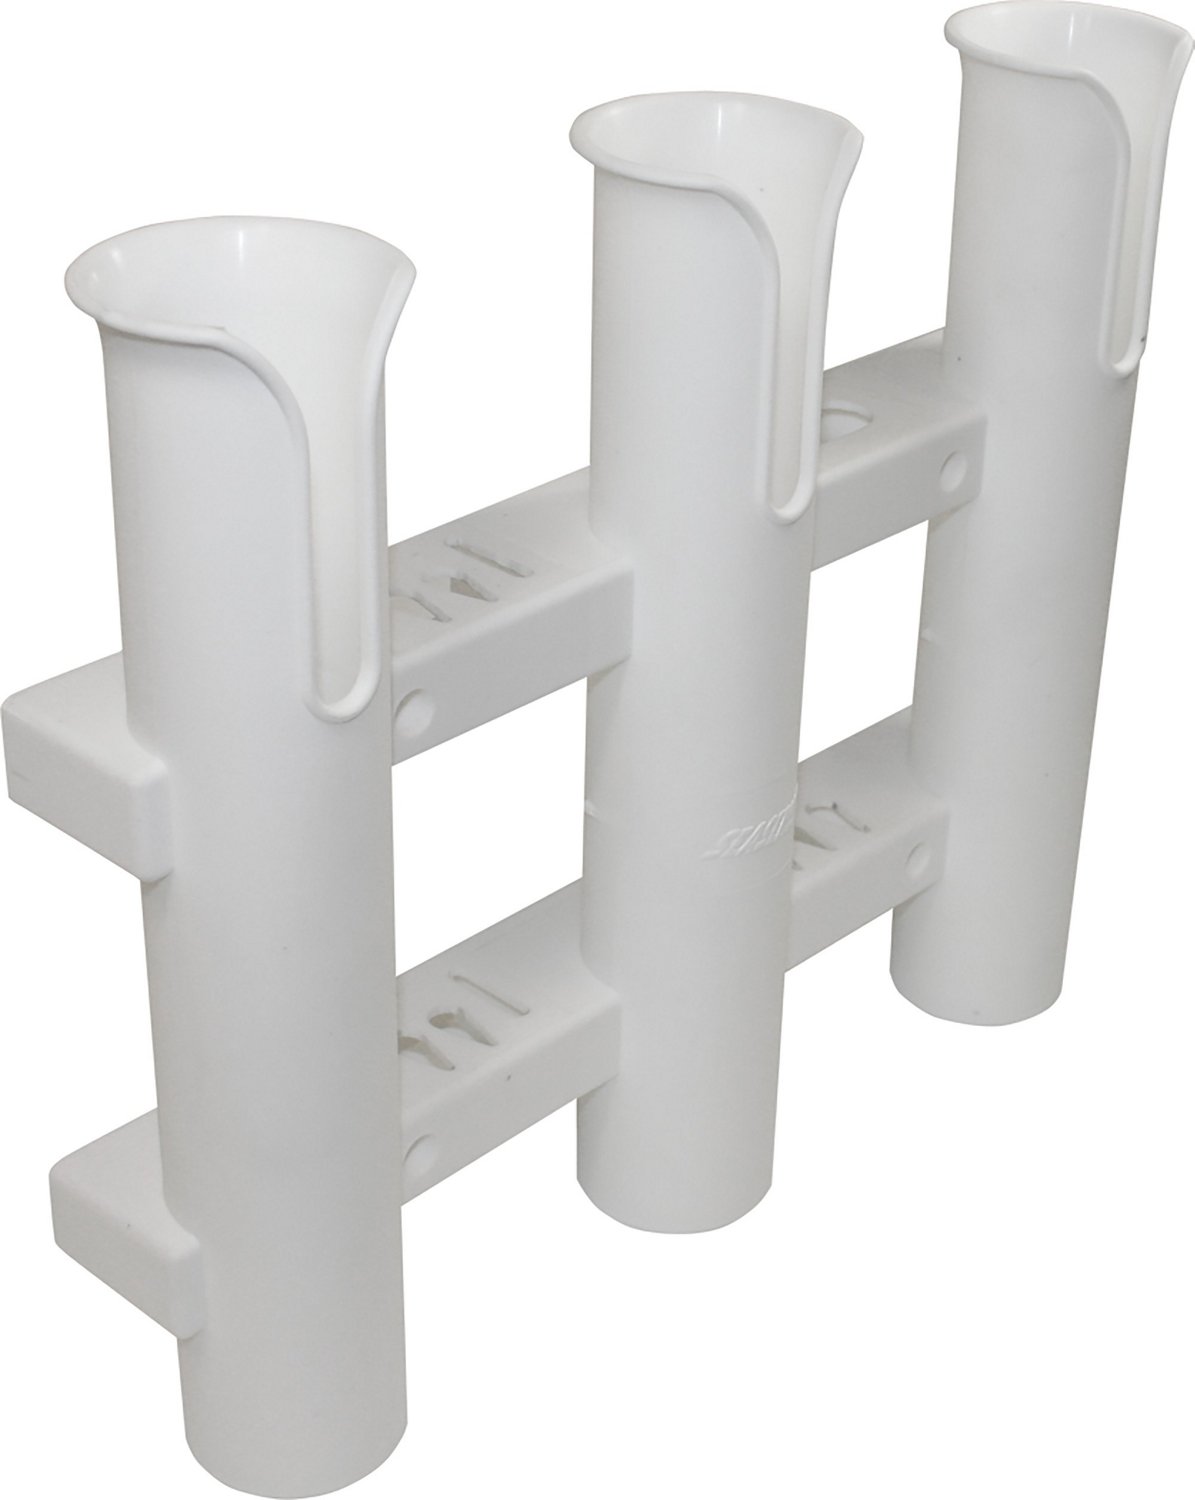 Rod Holder For Boats  Price Match Guaranteed